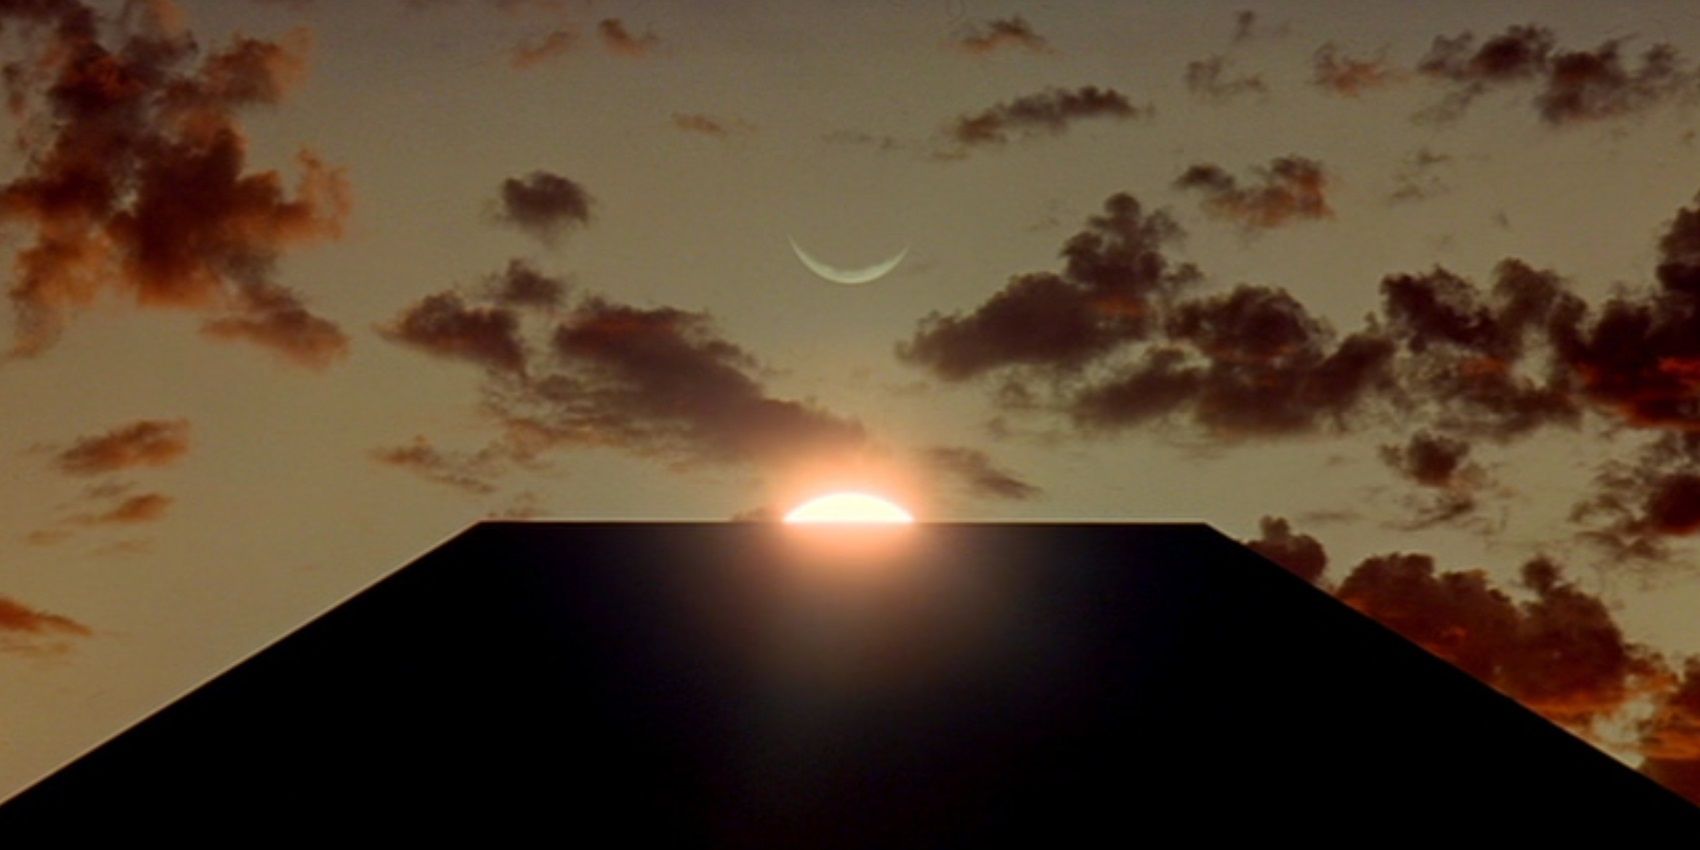 A Monolith in 2001 A Space Odyssey